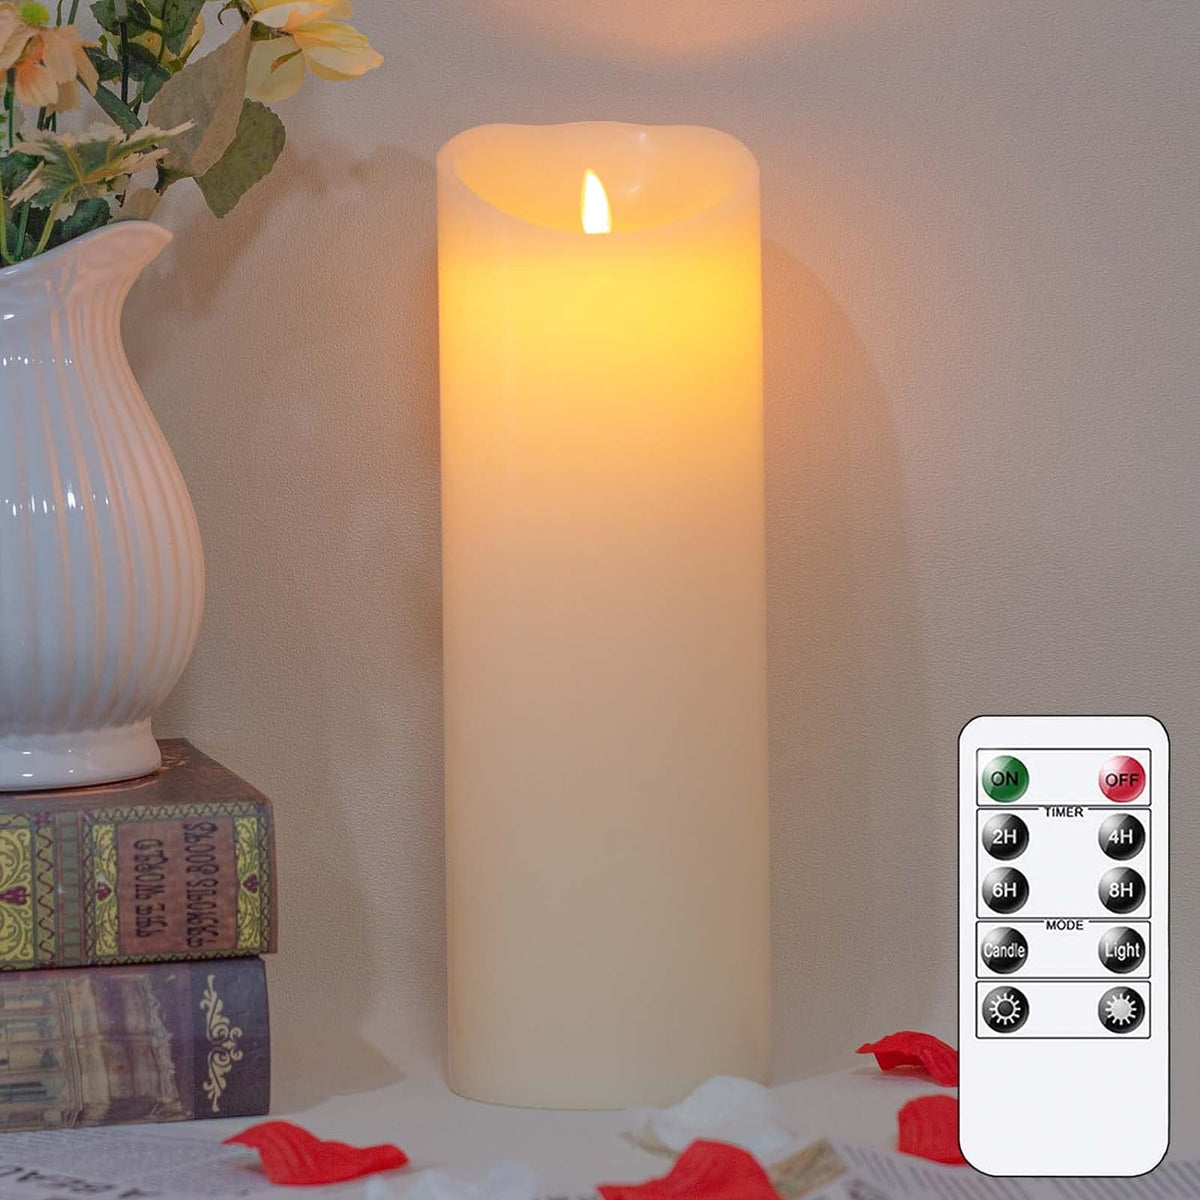 Flameless Flickering Candles with Remote,Real Wax LED Battery Operated Pillar Candles with Timer,Ivory Long Lasting Fake Electric Moving Wick Flameless Candles for Home Decor10x30cm